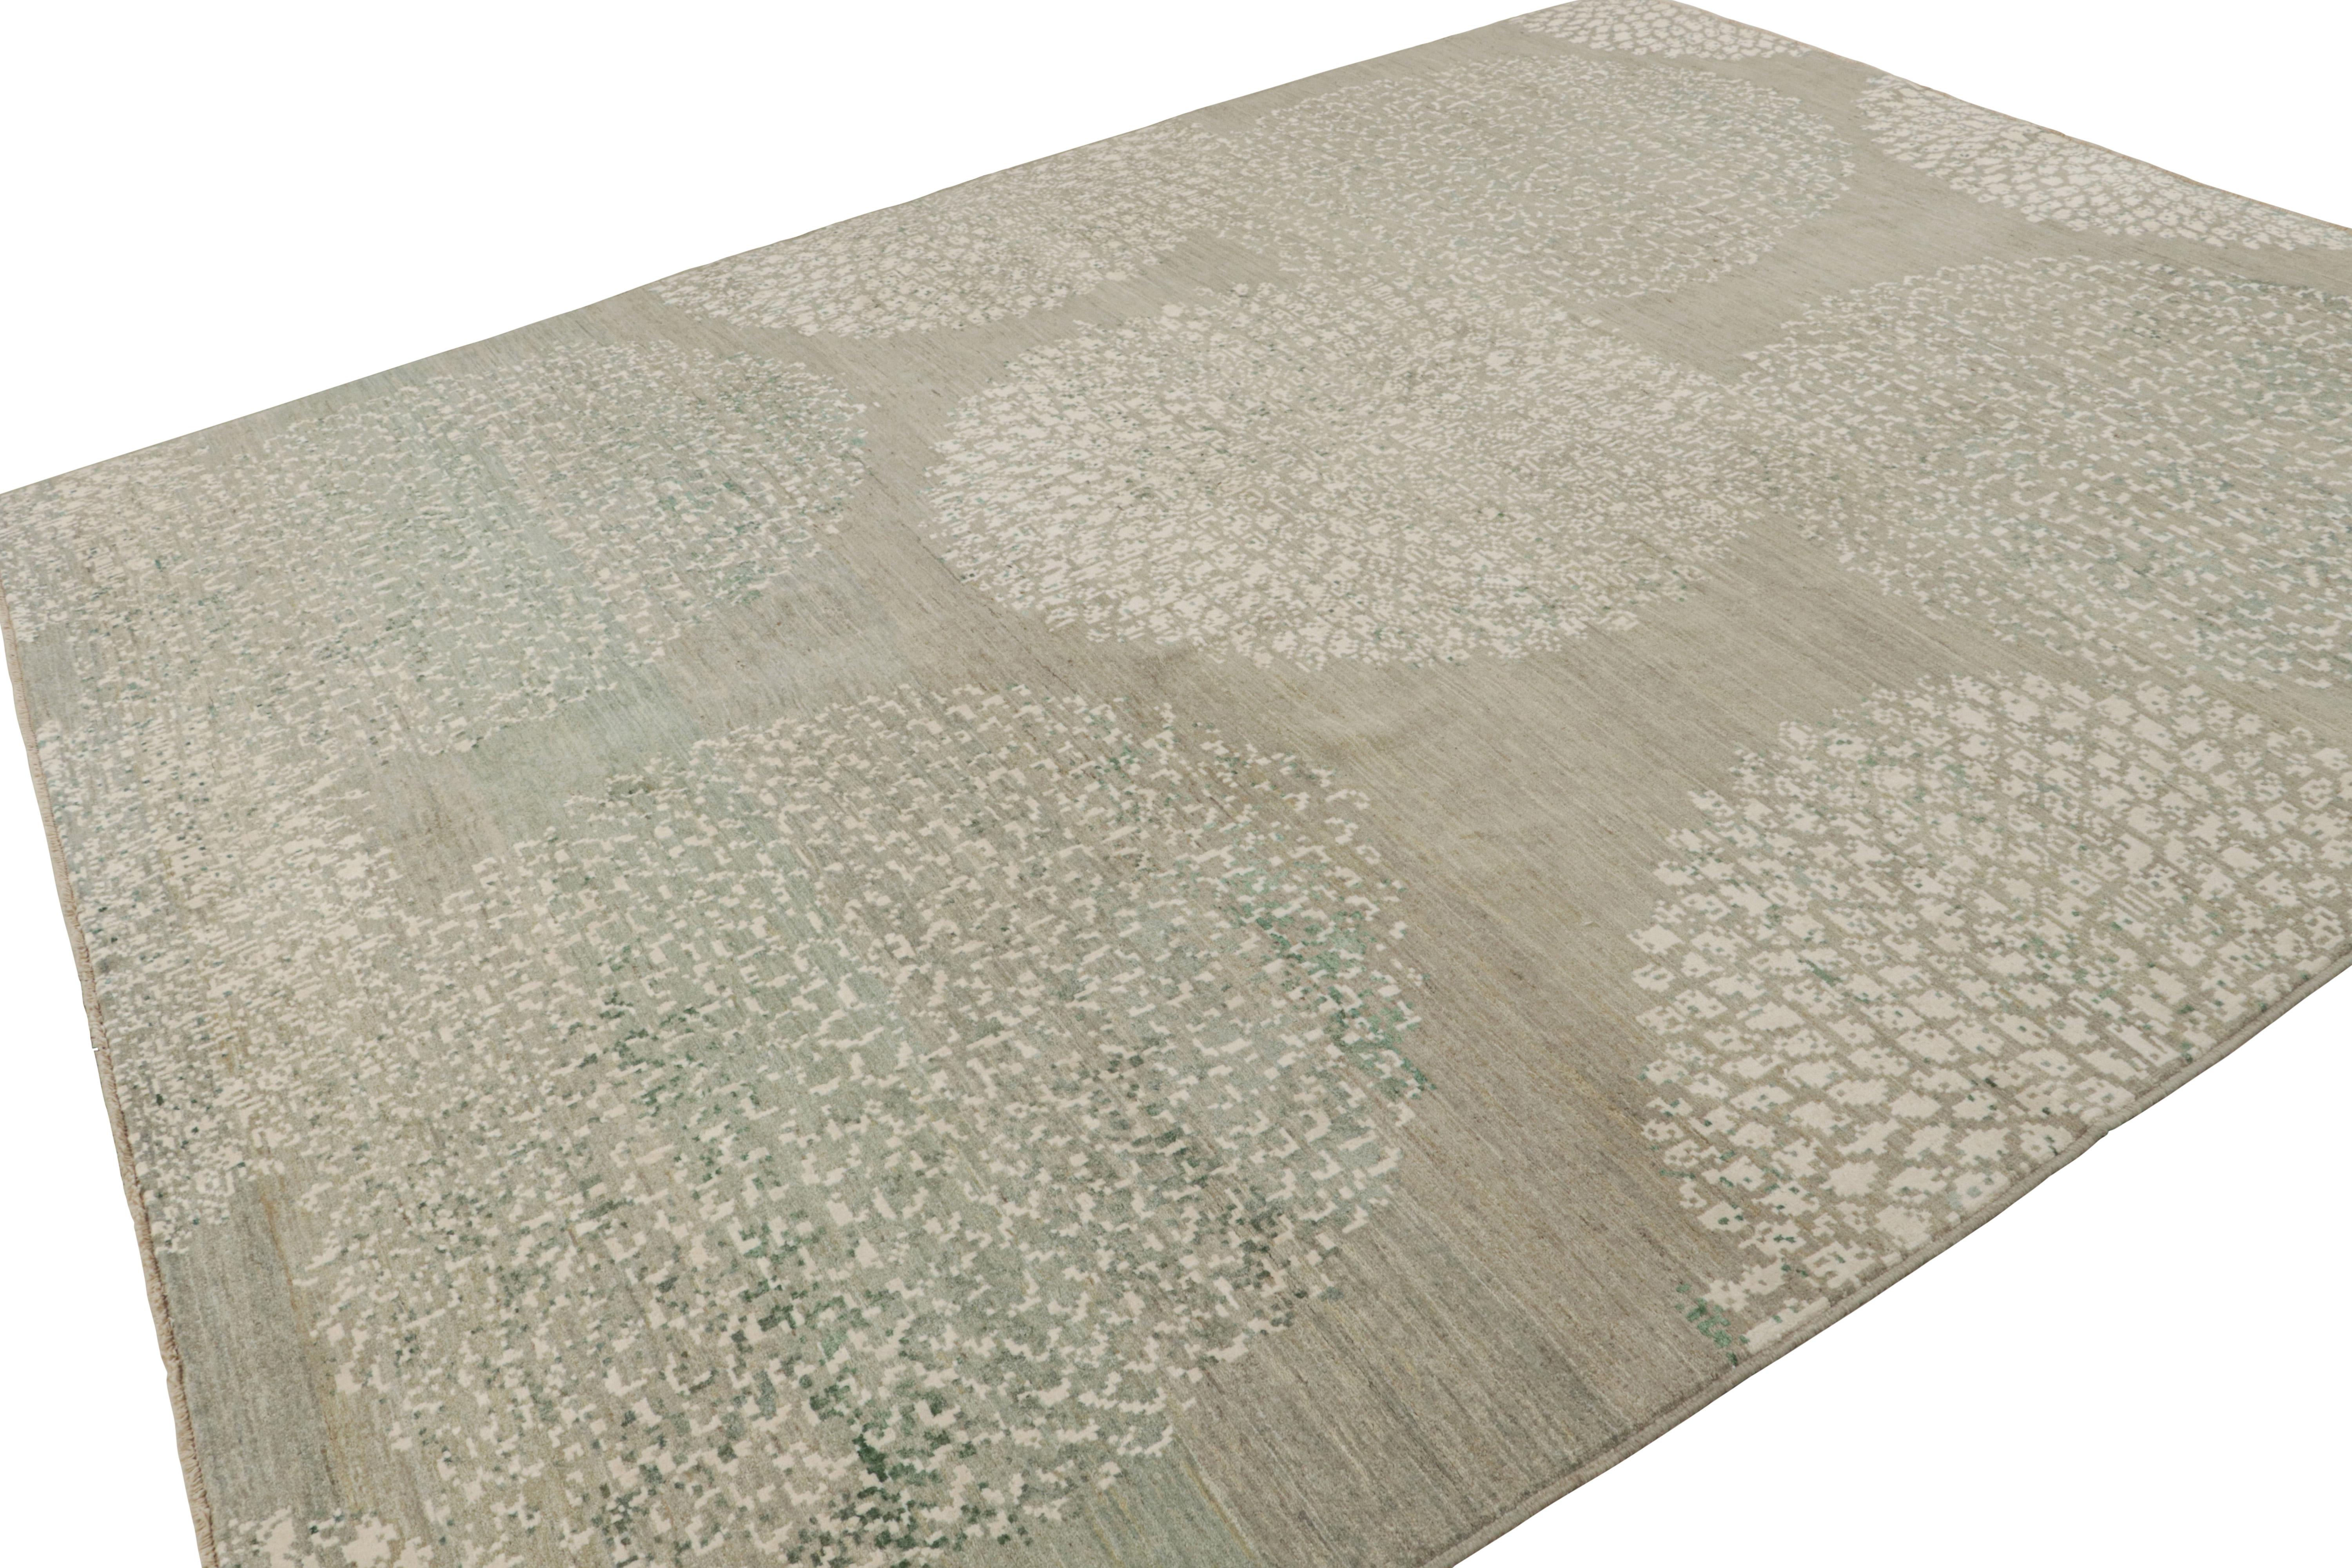 Hand-knotted in cotton and silk, this 9x12 modern rug explores a take on minimalist designs and subtlety, enjoying beige and gray undertones with off-white and green striae and geometric patterns.  

On the design: 

An exciting curation in the Rug